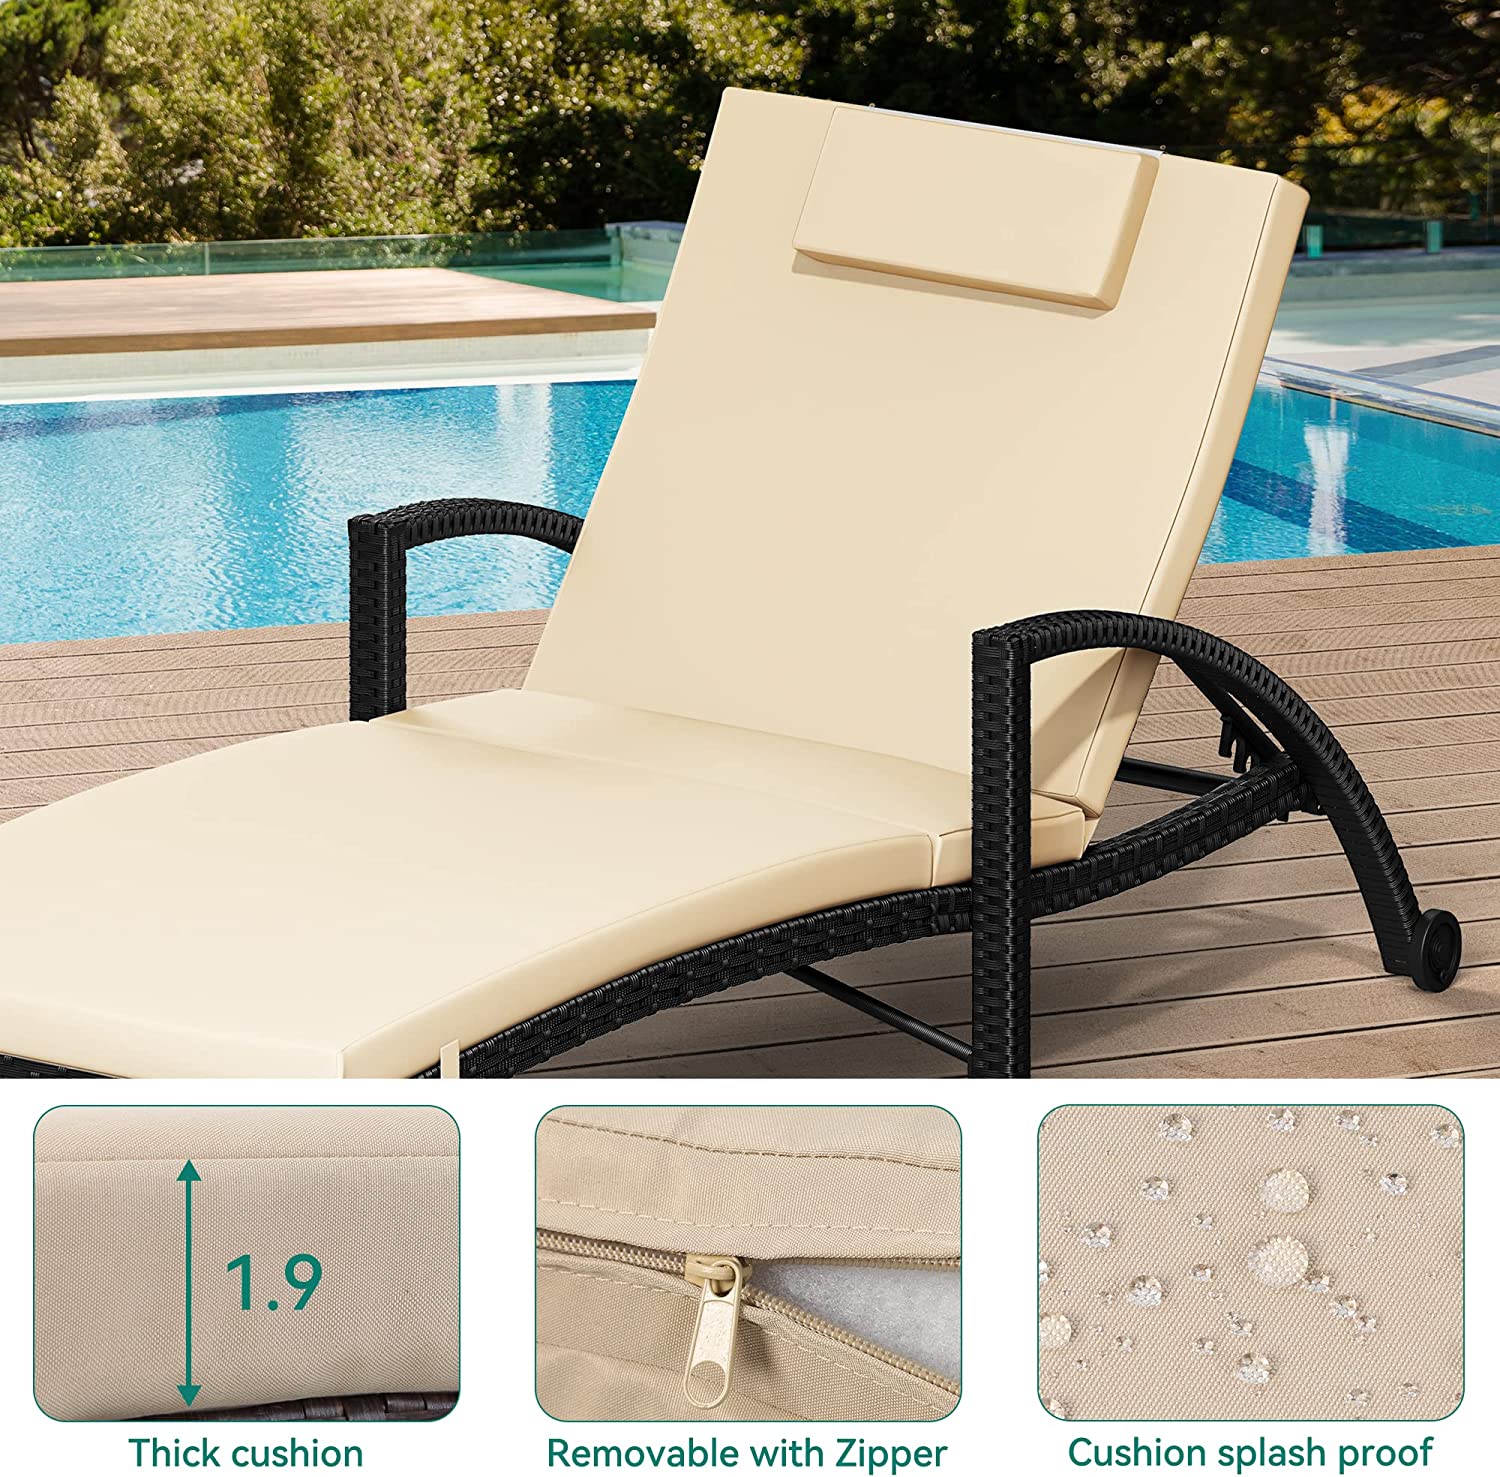 YITAHOME Outdoor Chaise Lounge Chairs, PE Rattan Wicker Patio Pool Loungers with Adjustable Backrest, Arm, Cushion, Pillow and Wheels for Poolside Backyard Porch Garden Beach (1, Black) - image 4 of 9